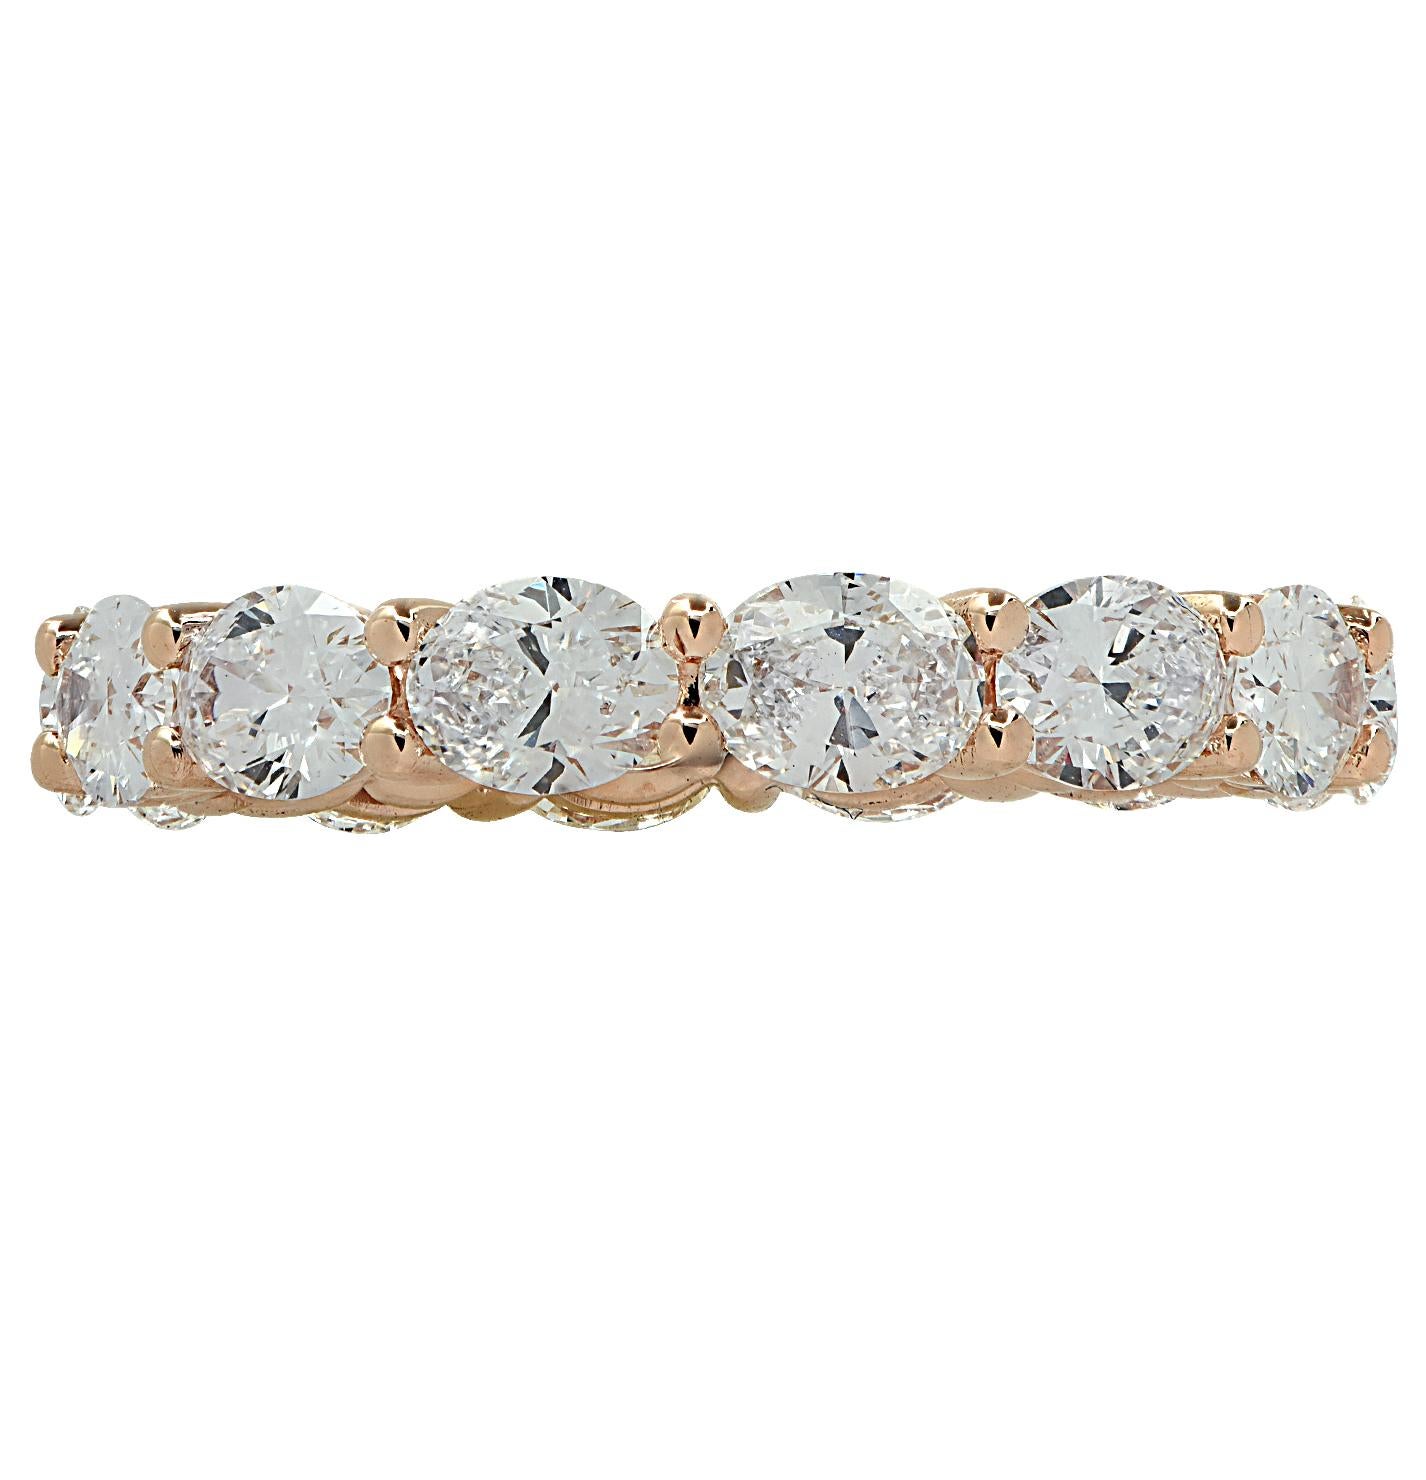 Stunning Vivid Diamonds Eat-West Eternity Band crafted in 18 karat Rose Gold, featuring 14 oval cut diamonds weighing 2.60 carats total, D-E color, VVS-VS clarity. These fine diamonds are seamlessly set, east-west, in a modern take on the classic